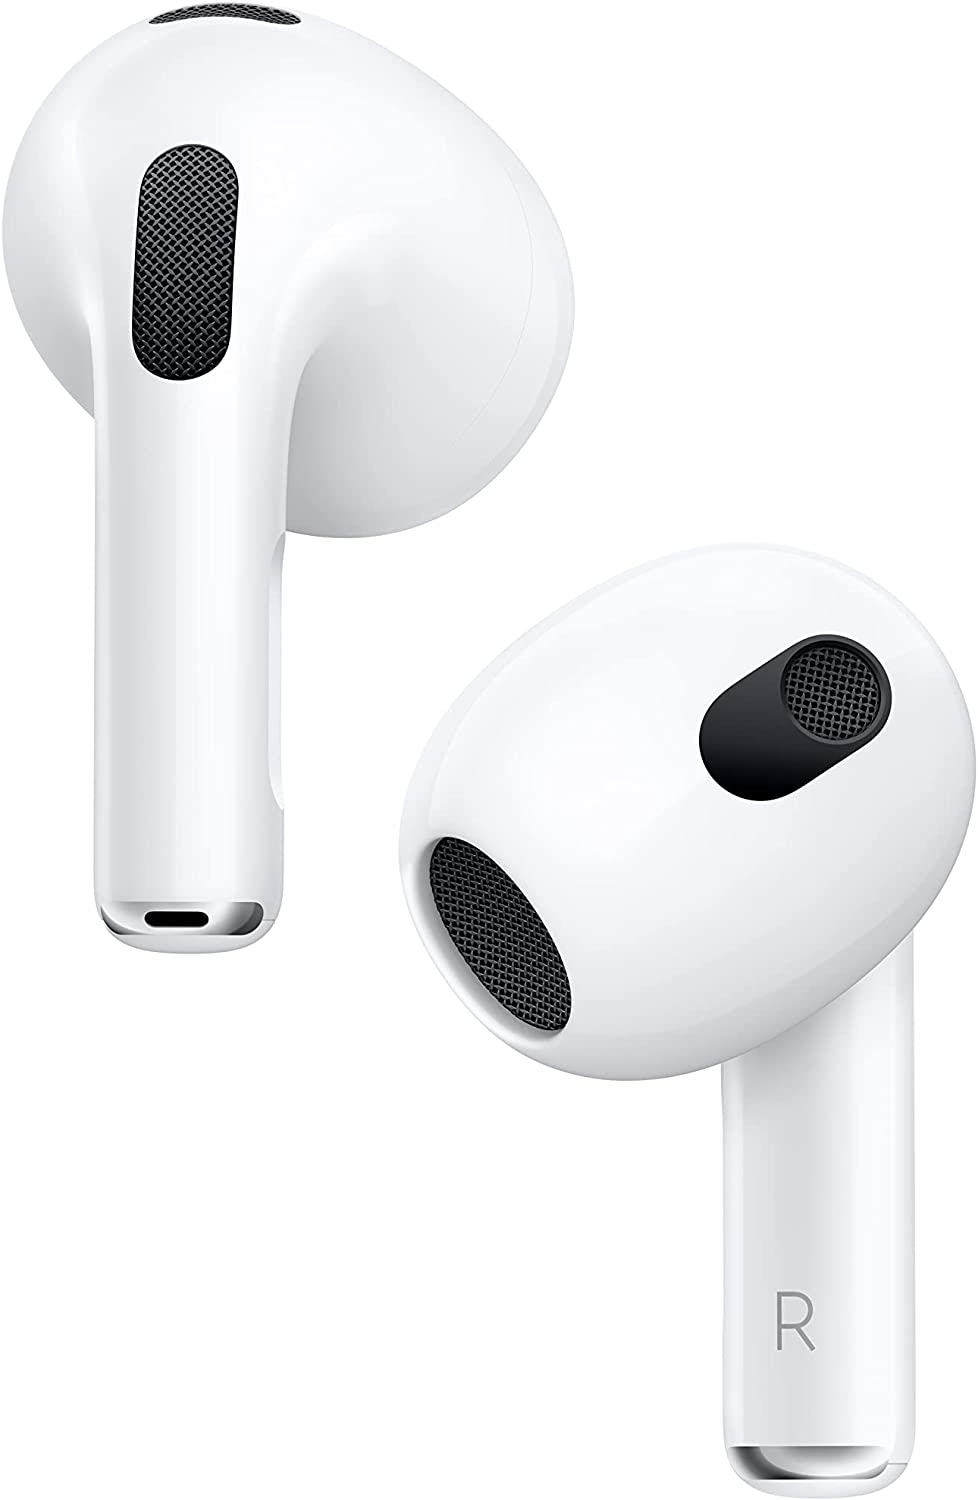 Apple AirPods (3rd Generation) $140 + Free Shipping